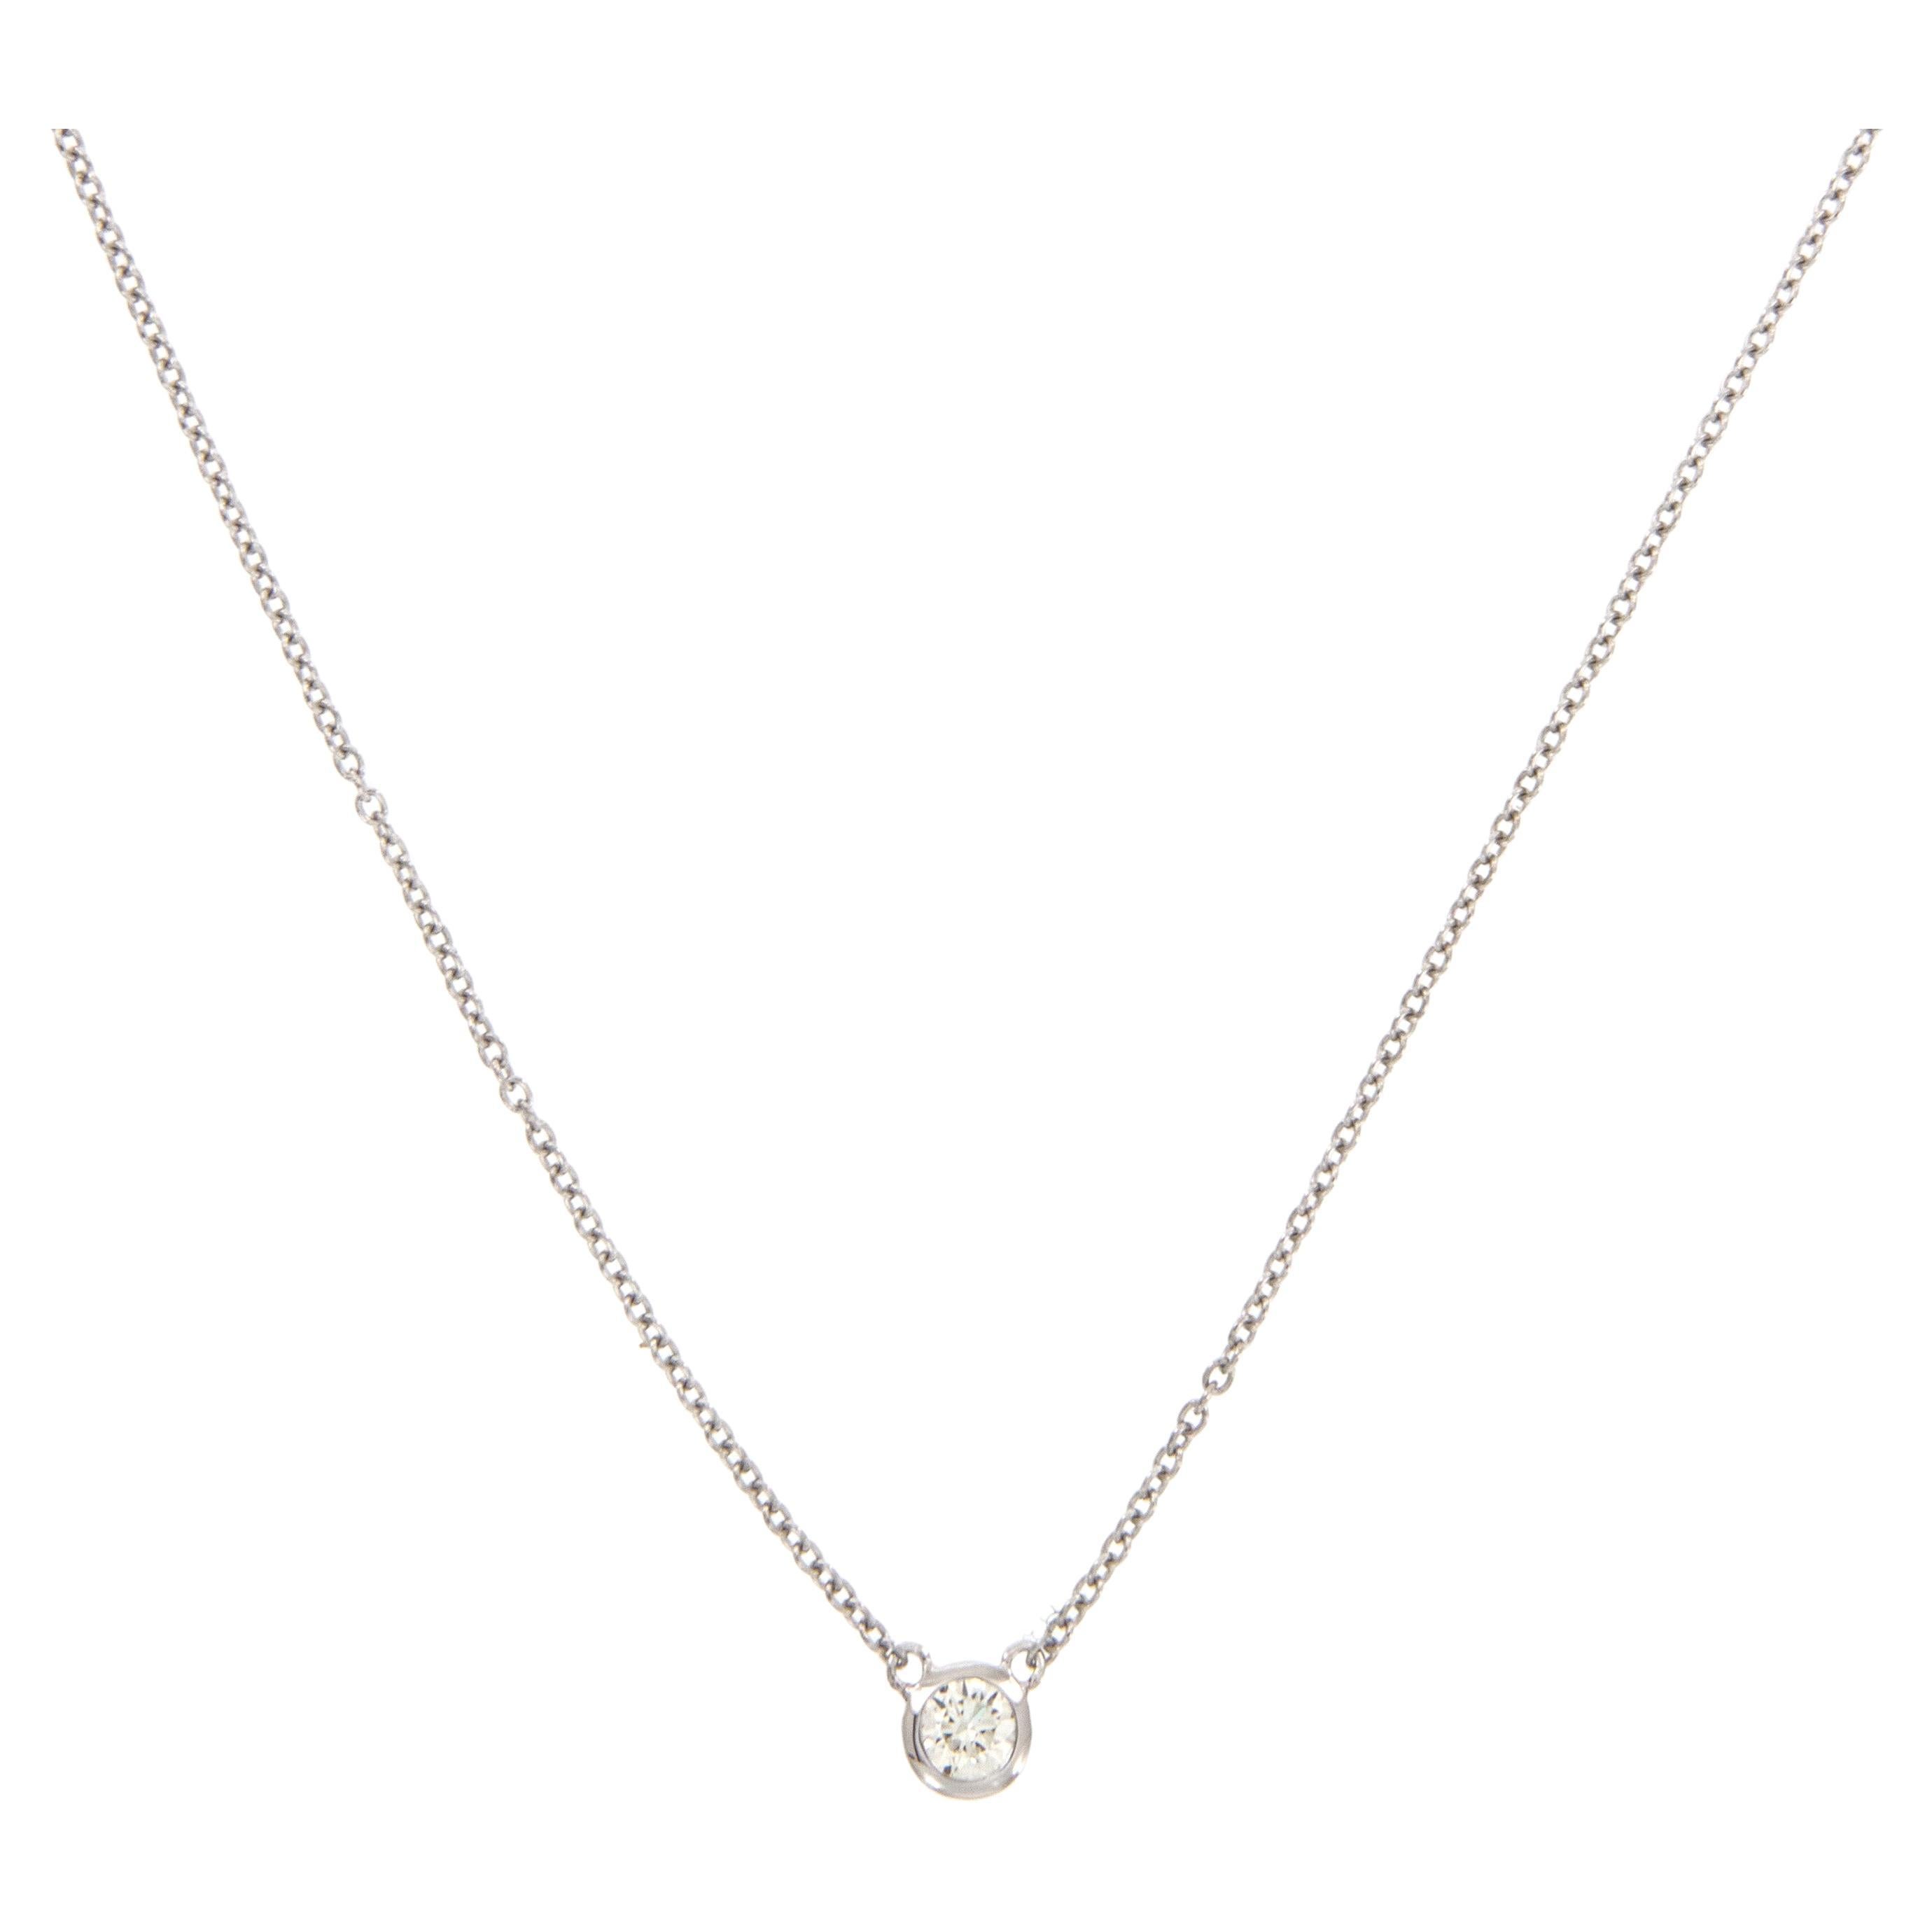 If you are looking for the one necklace you put on & never have to take off - look no further! This is the necklace for you- crafted from 14 karat white gold with one round brilliant diamond = 0.20 Carat  SI1 clarity and G color bezel set in the